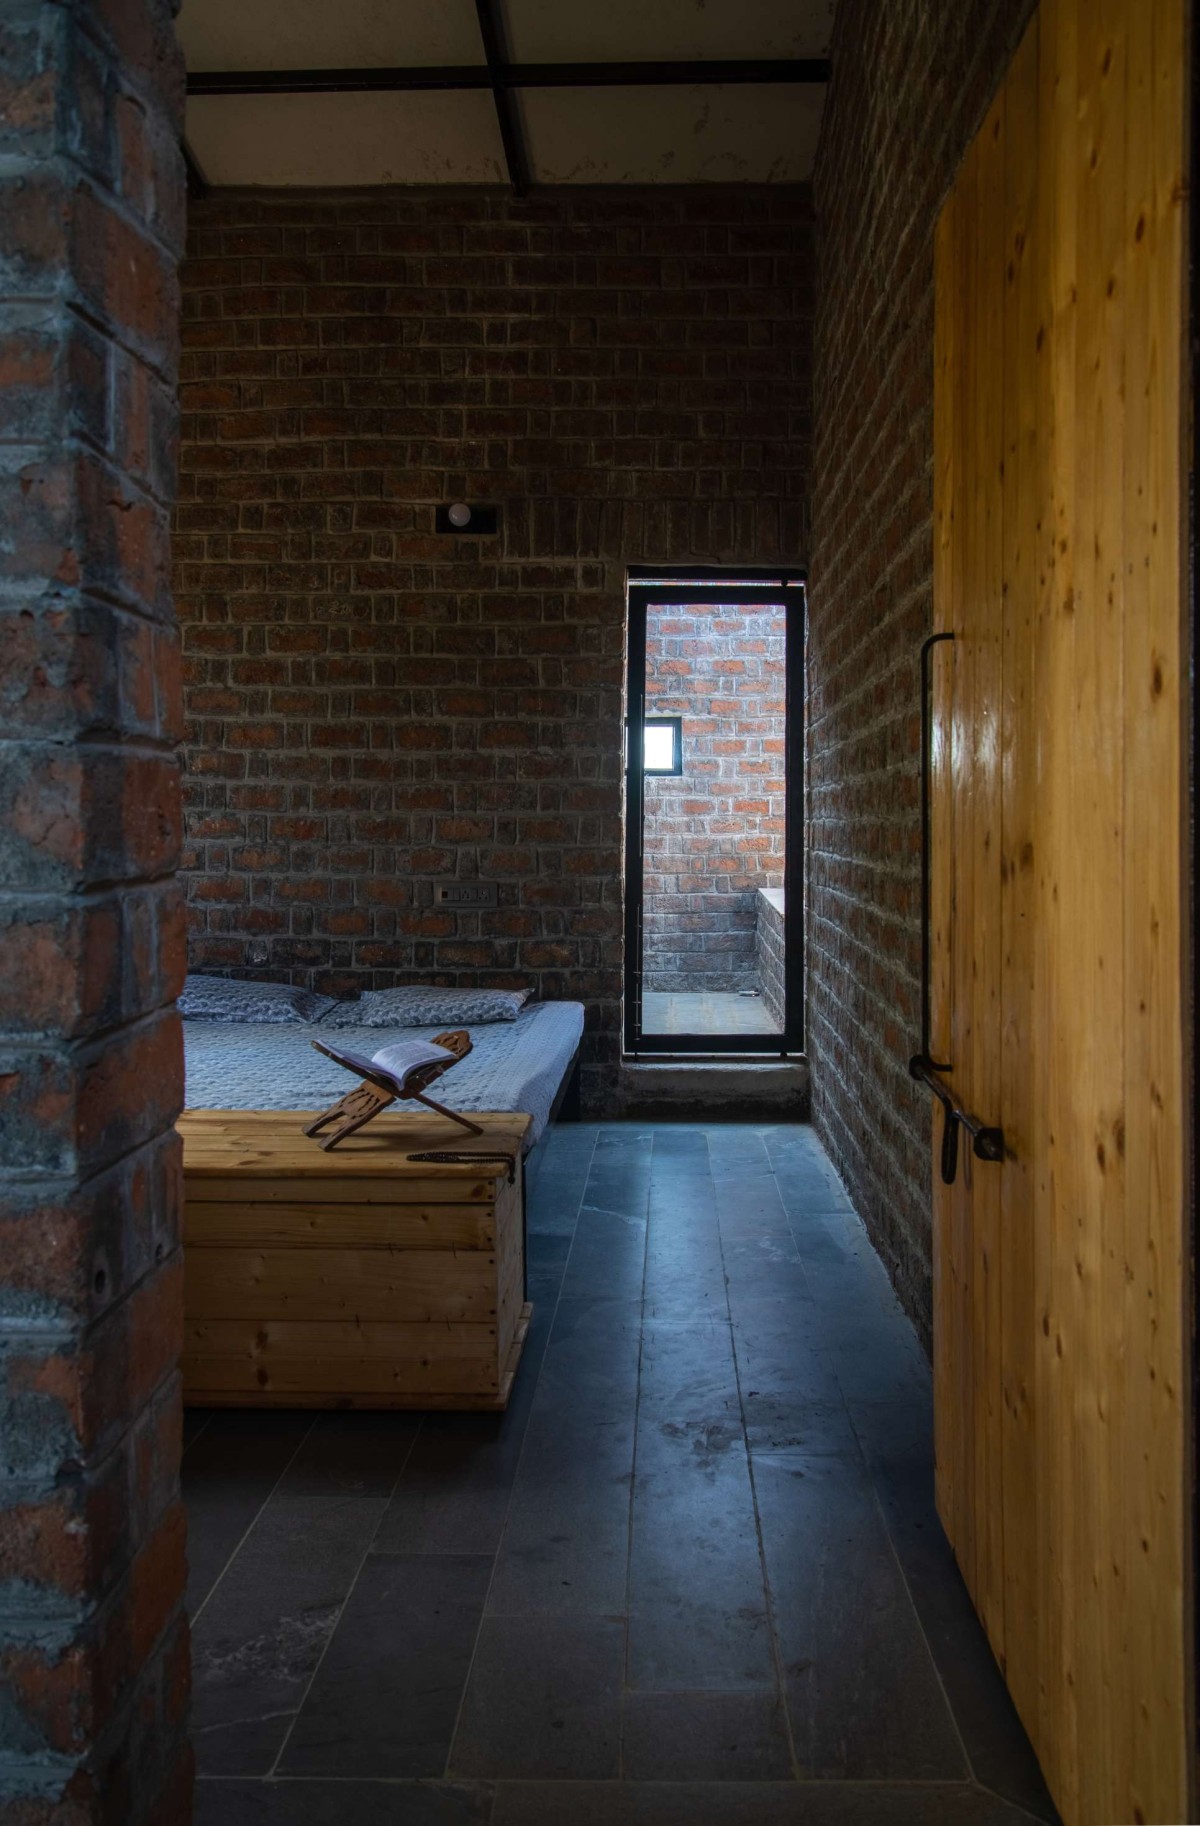 Bedroom of Half Is More – House in Progress by Atelier Shantanu Autade + Studio Boxx